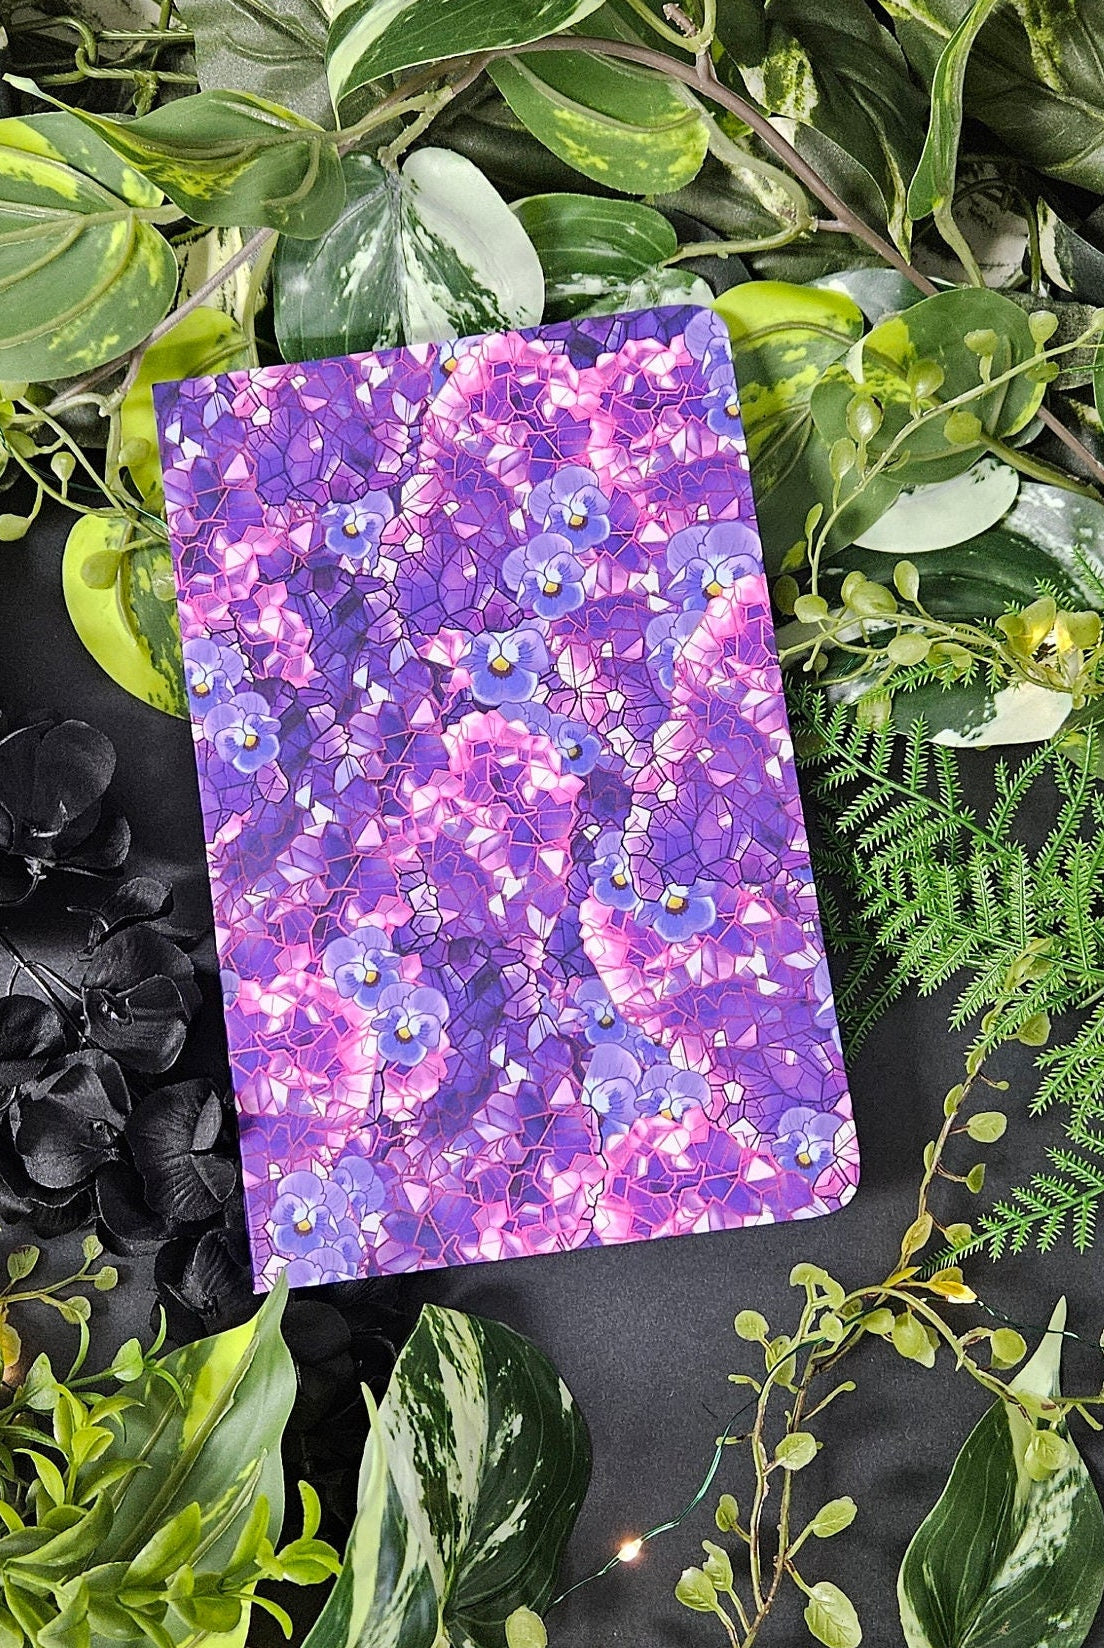 LAYFLAT NOTEBOOK: Amethyst Crystal Heart with College Ruled Lines Pages , Amethyst Crystal Notebook , Amethyst Crystal Heart , Amethyst Art